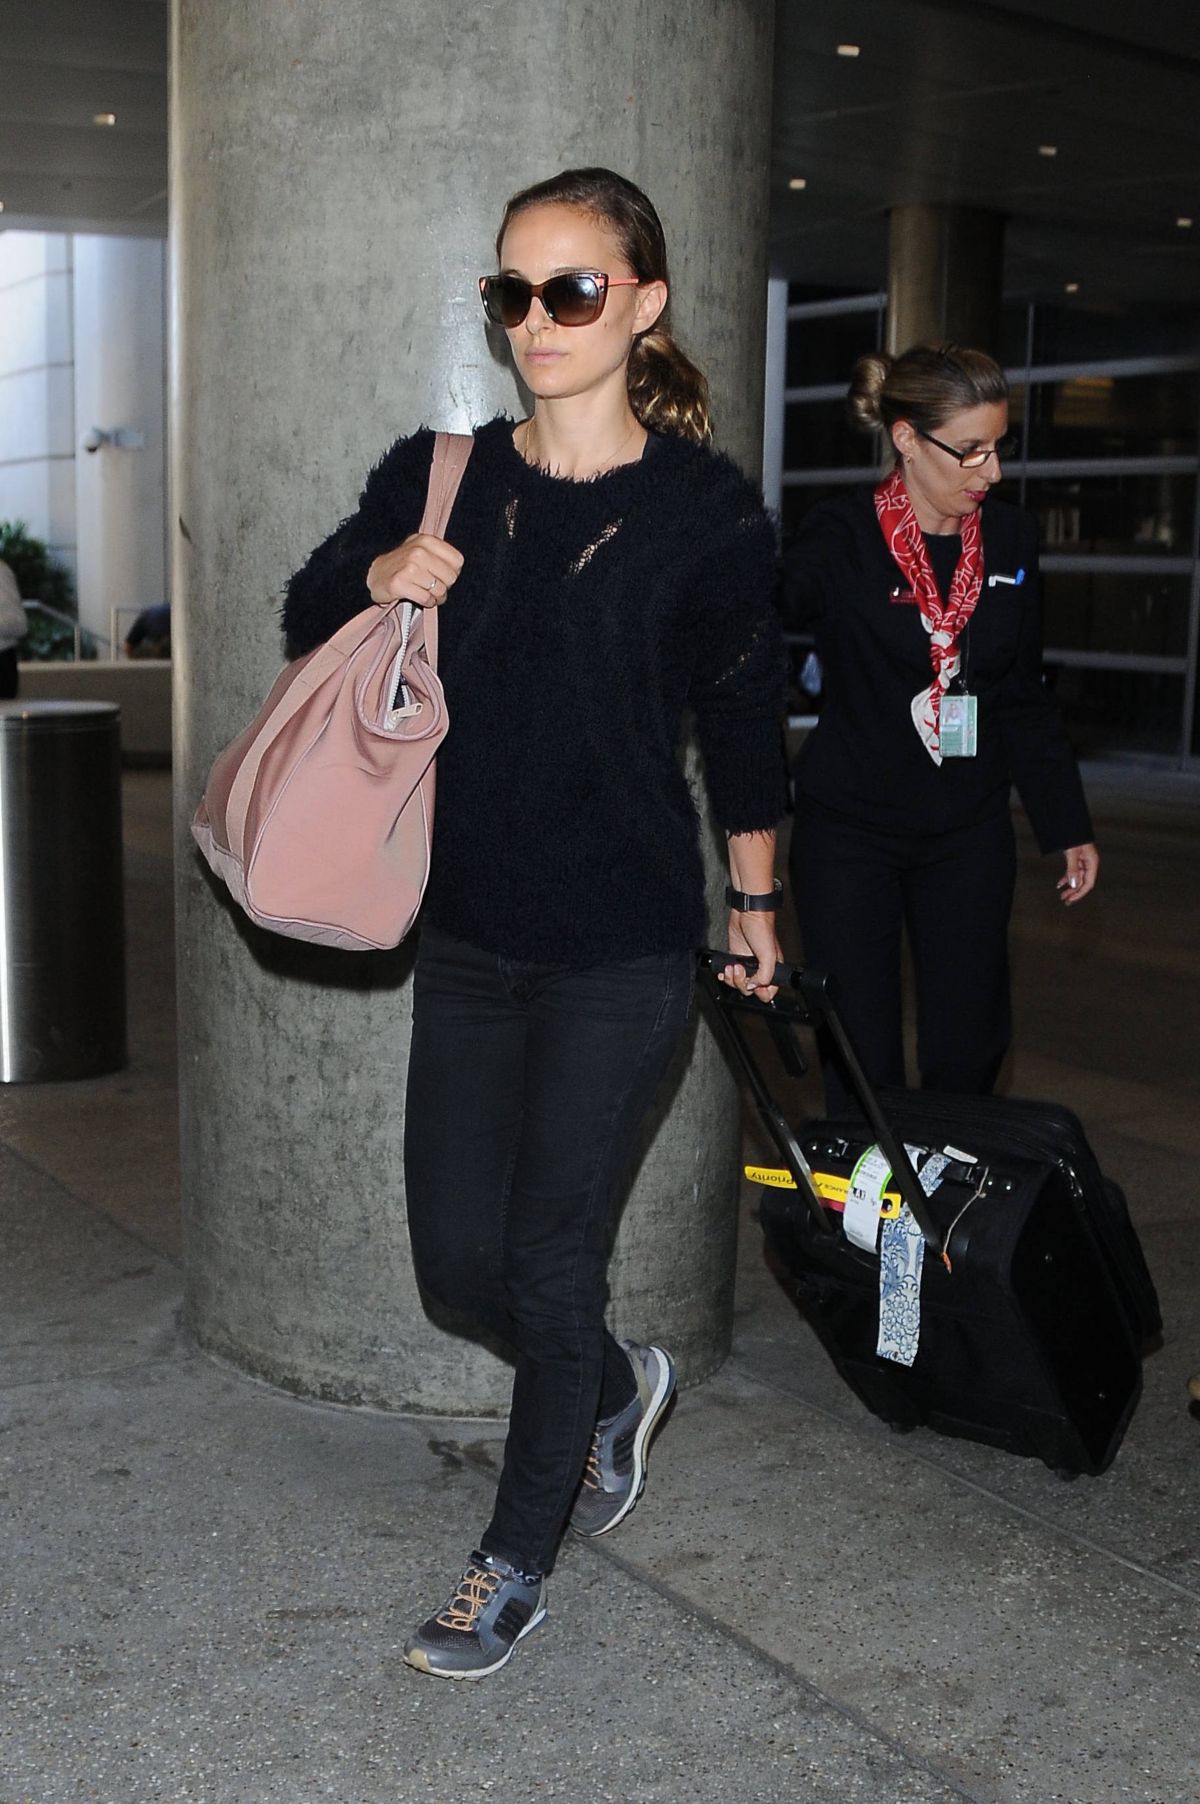 NATALIE PORTMAN Arrives at LAX Airport in Los Angeles – HawtCelebs